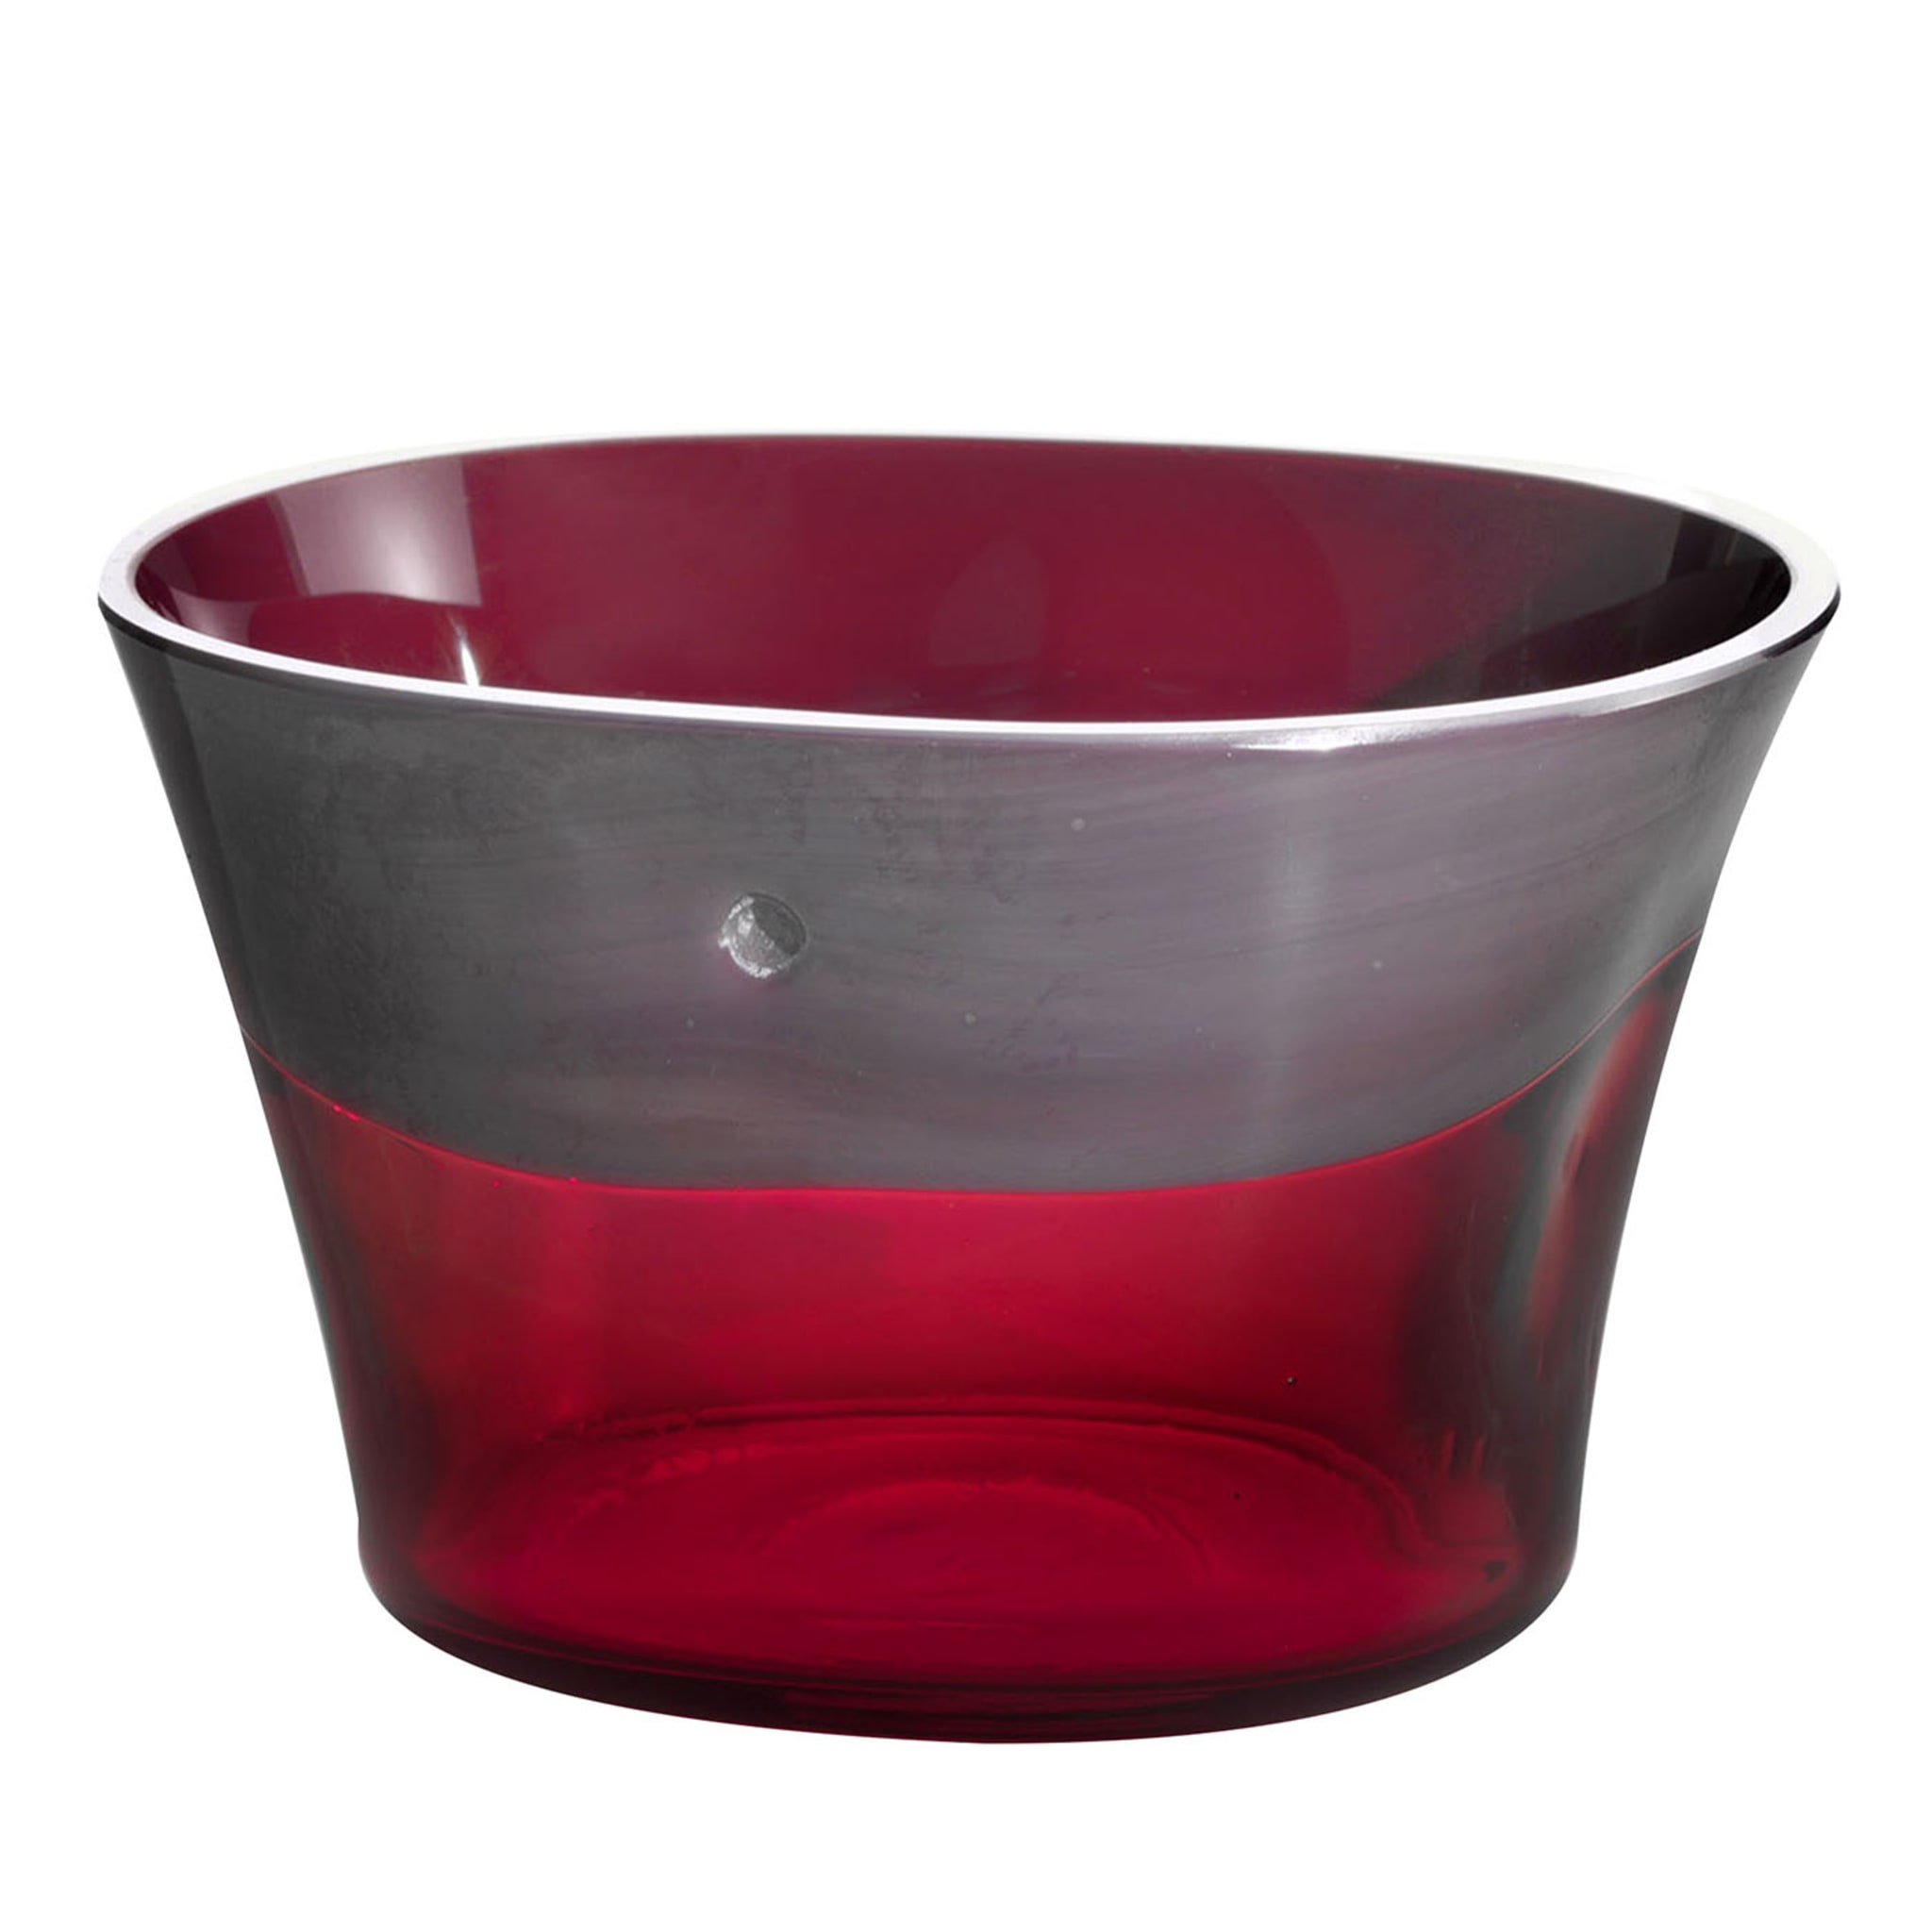 Dandy Small Gray & Cranberry Bowl by Stefano Marcato - Main view